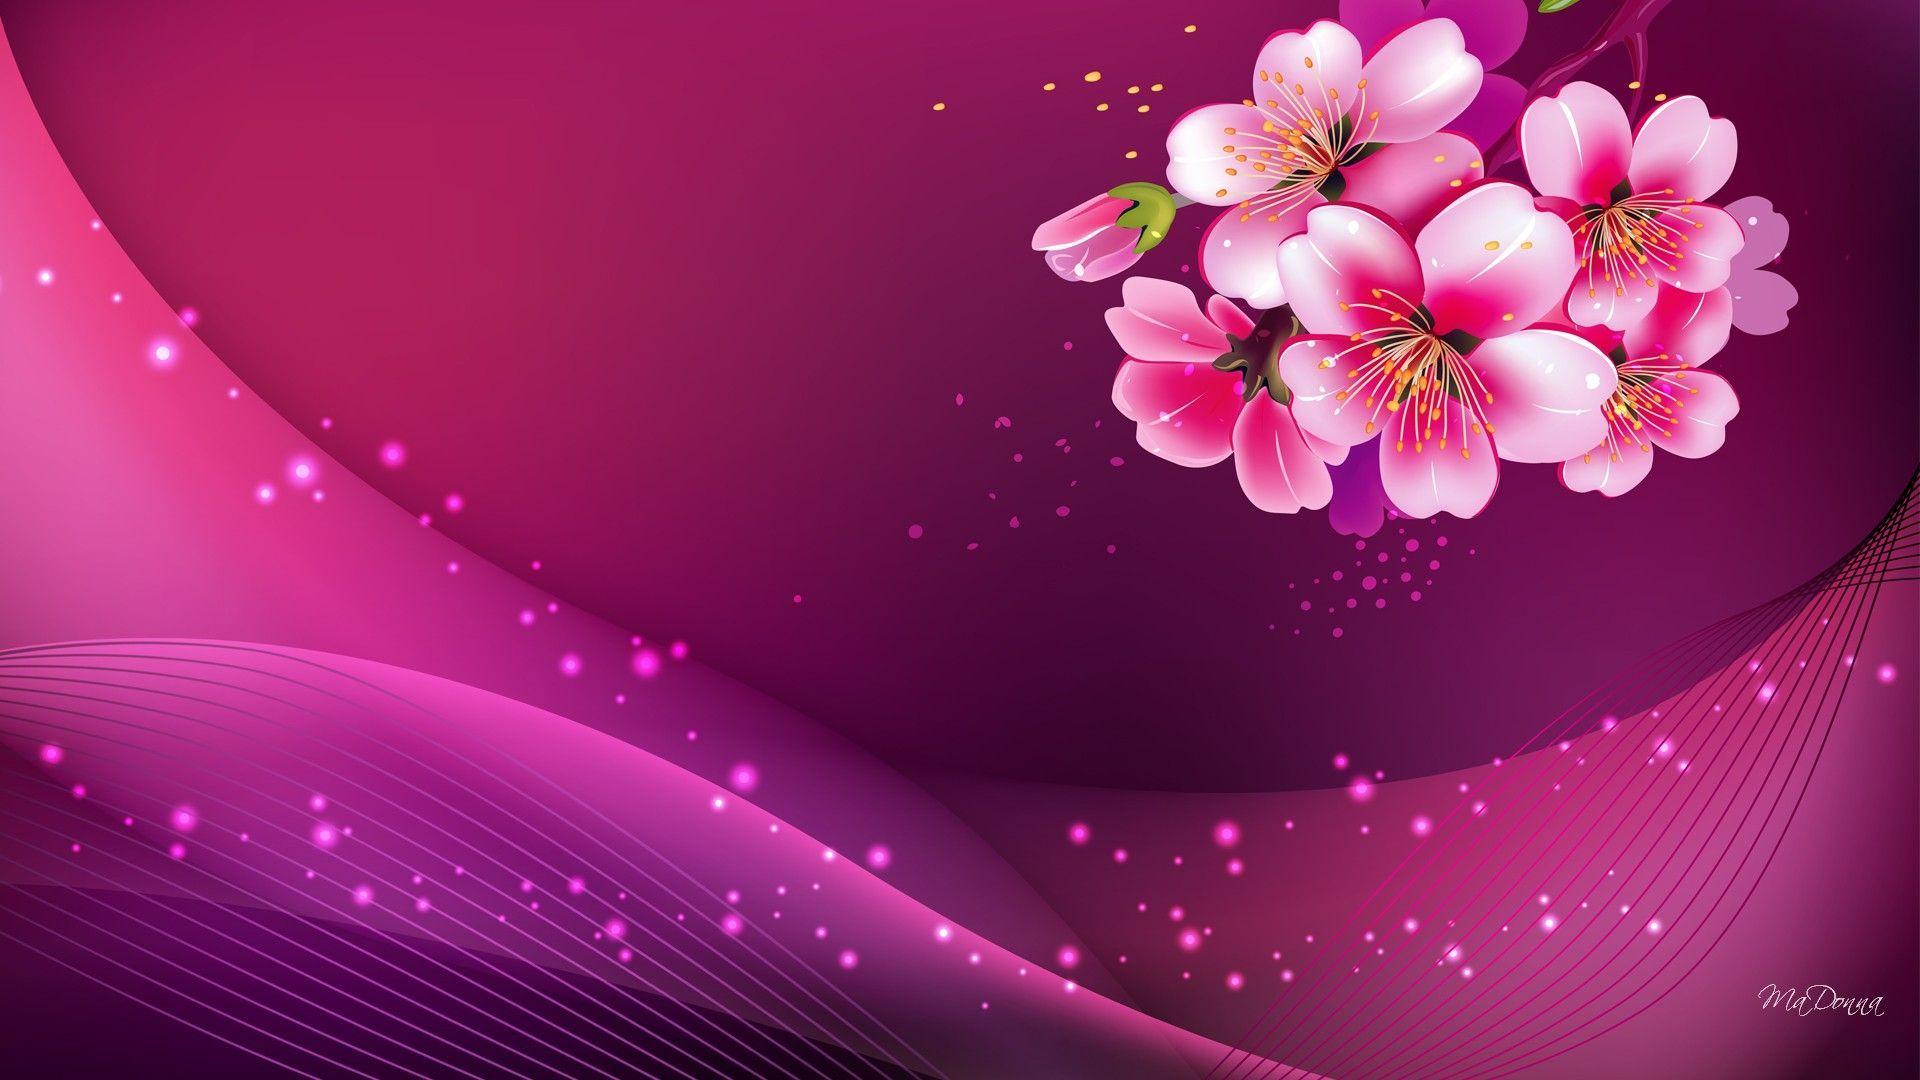 HD Backgrounds Pink - Wallpaper Cave.